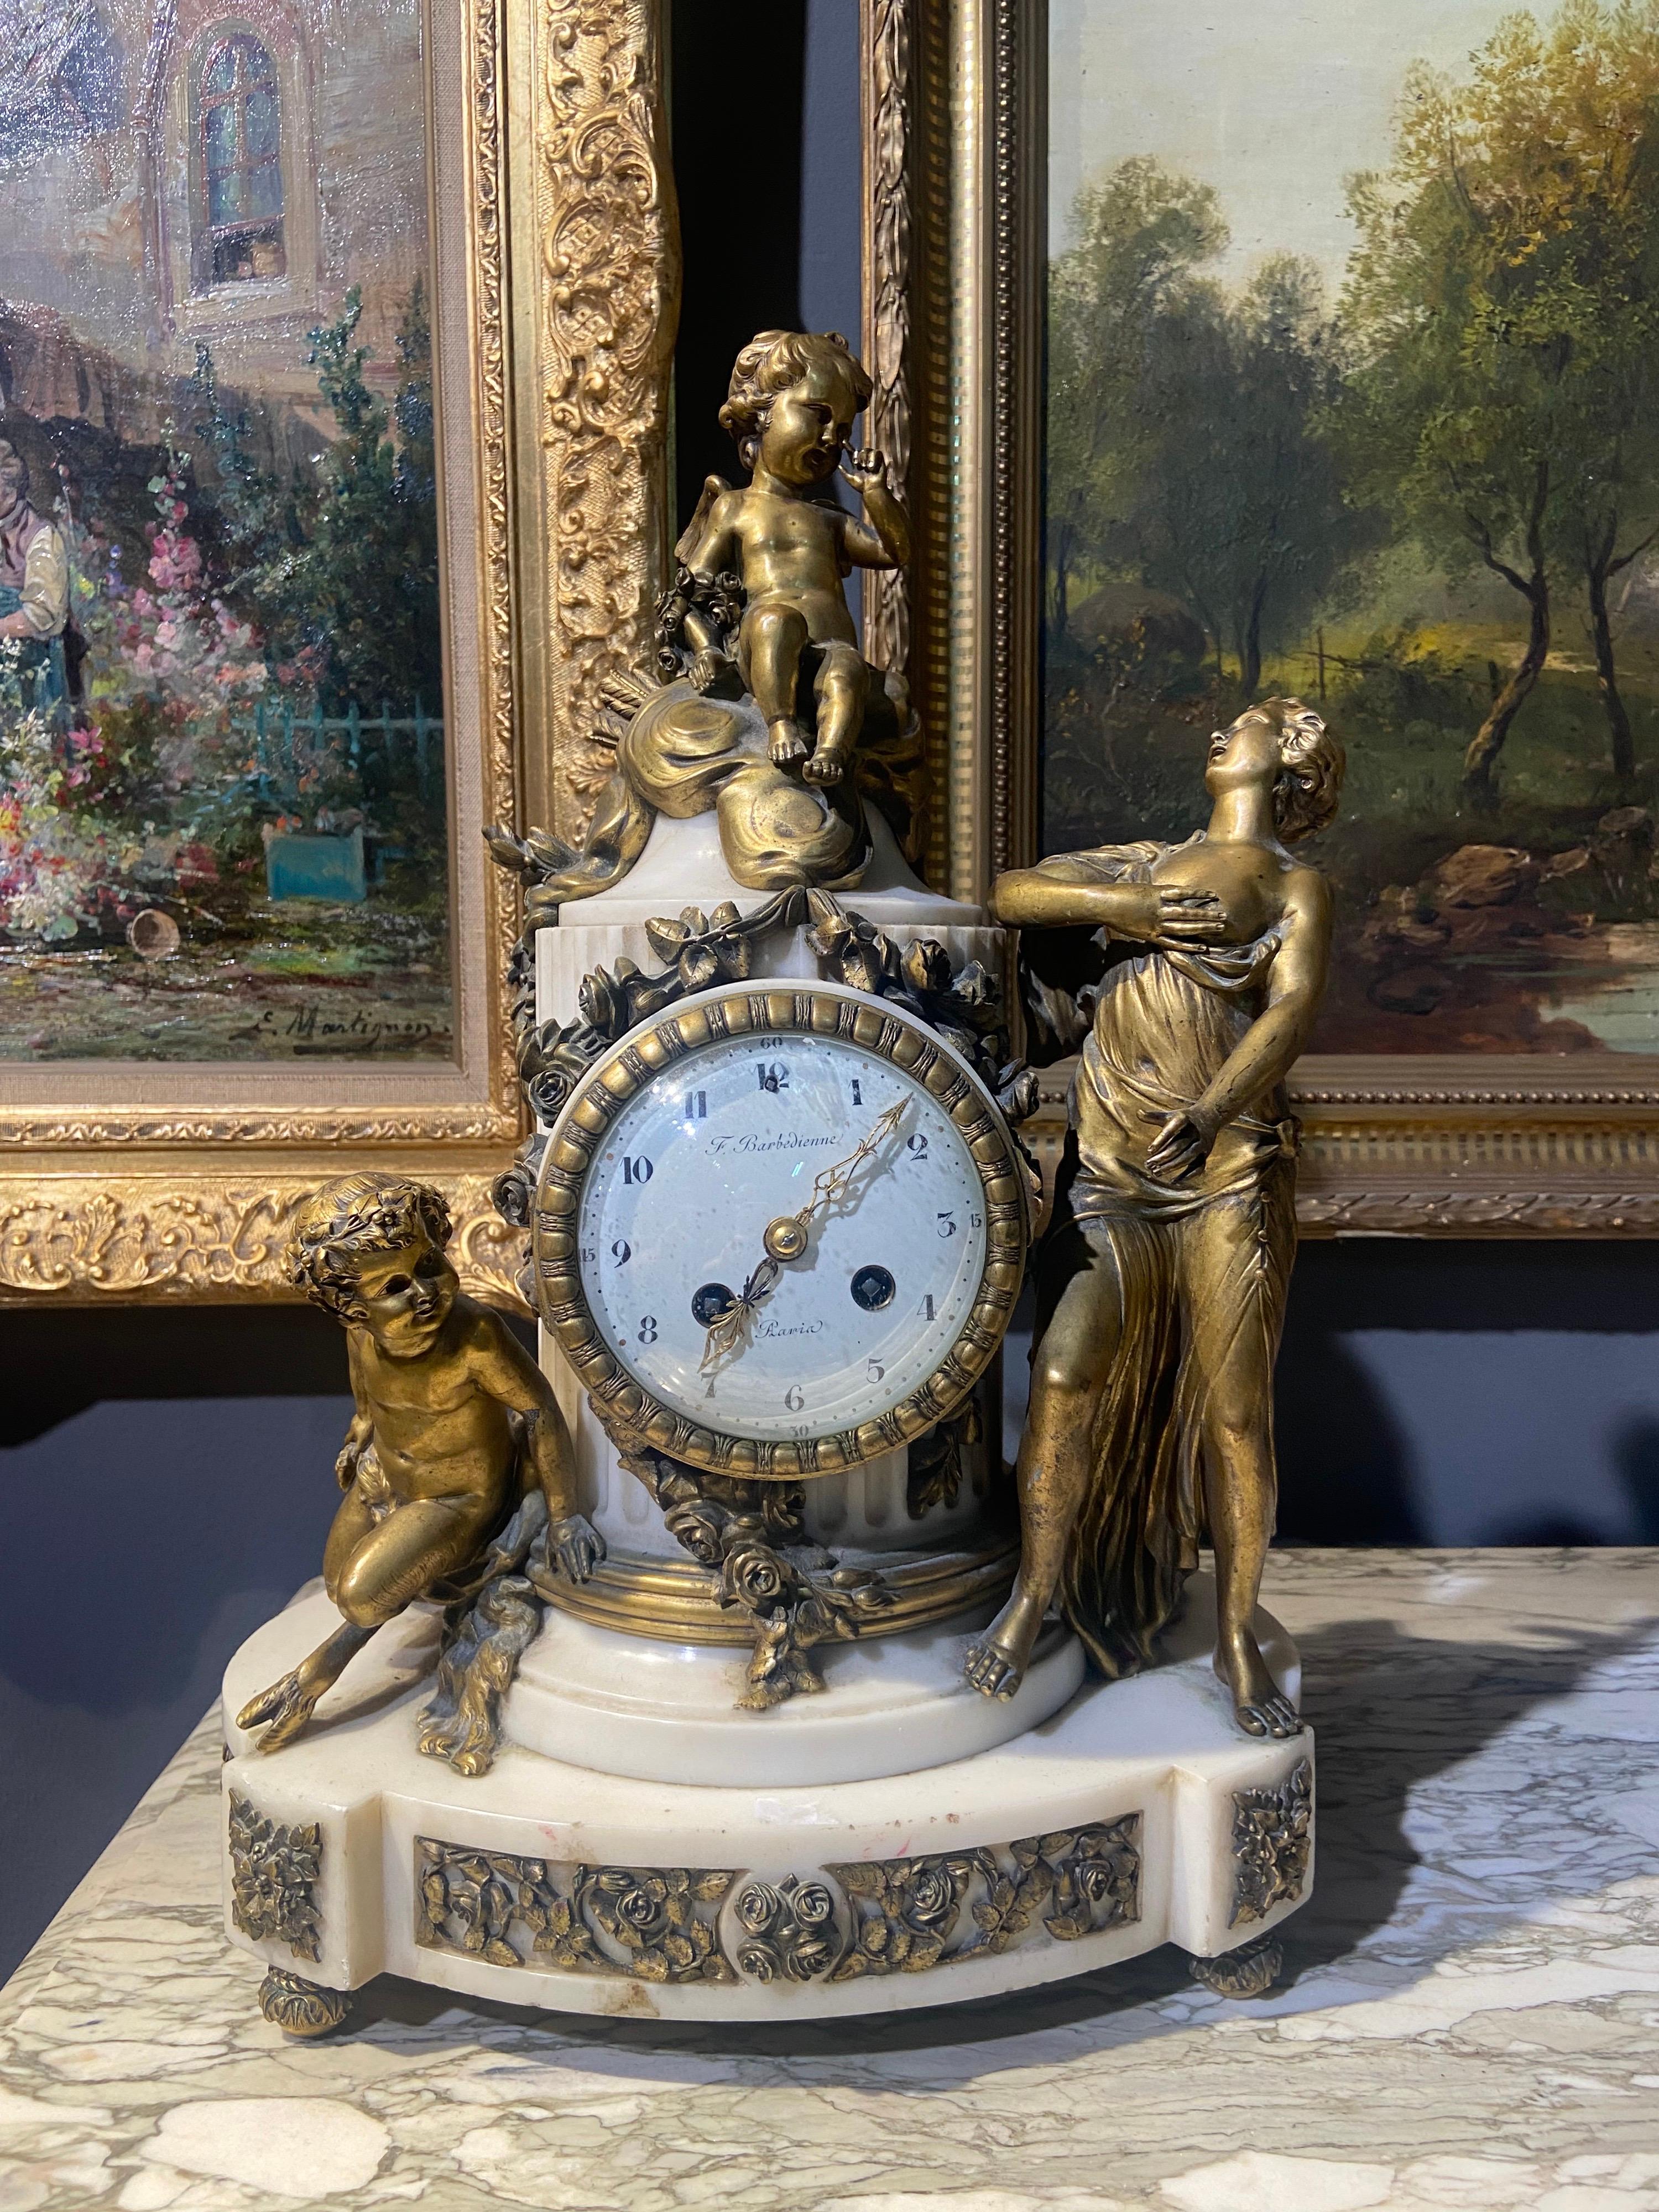 French mantel clock by Ferdinand Barbedienne consisting of a terminal clock in the form of a fluted column in white marble and decorated with three figures in gilded bronze: satyr child, putto and young woman; the dial signed F. Barbedienne Paris.